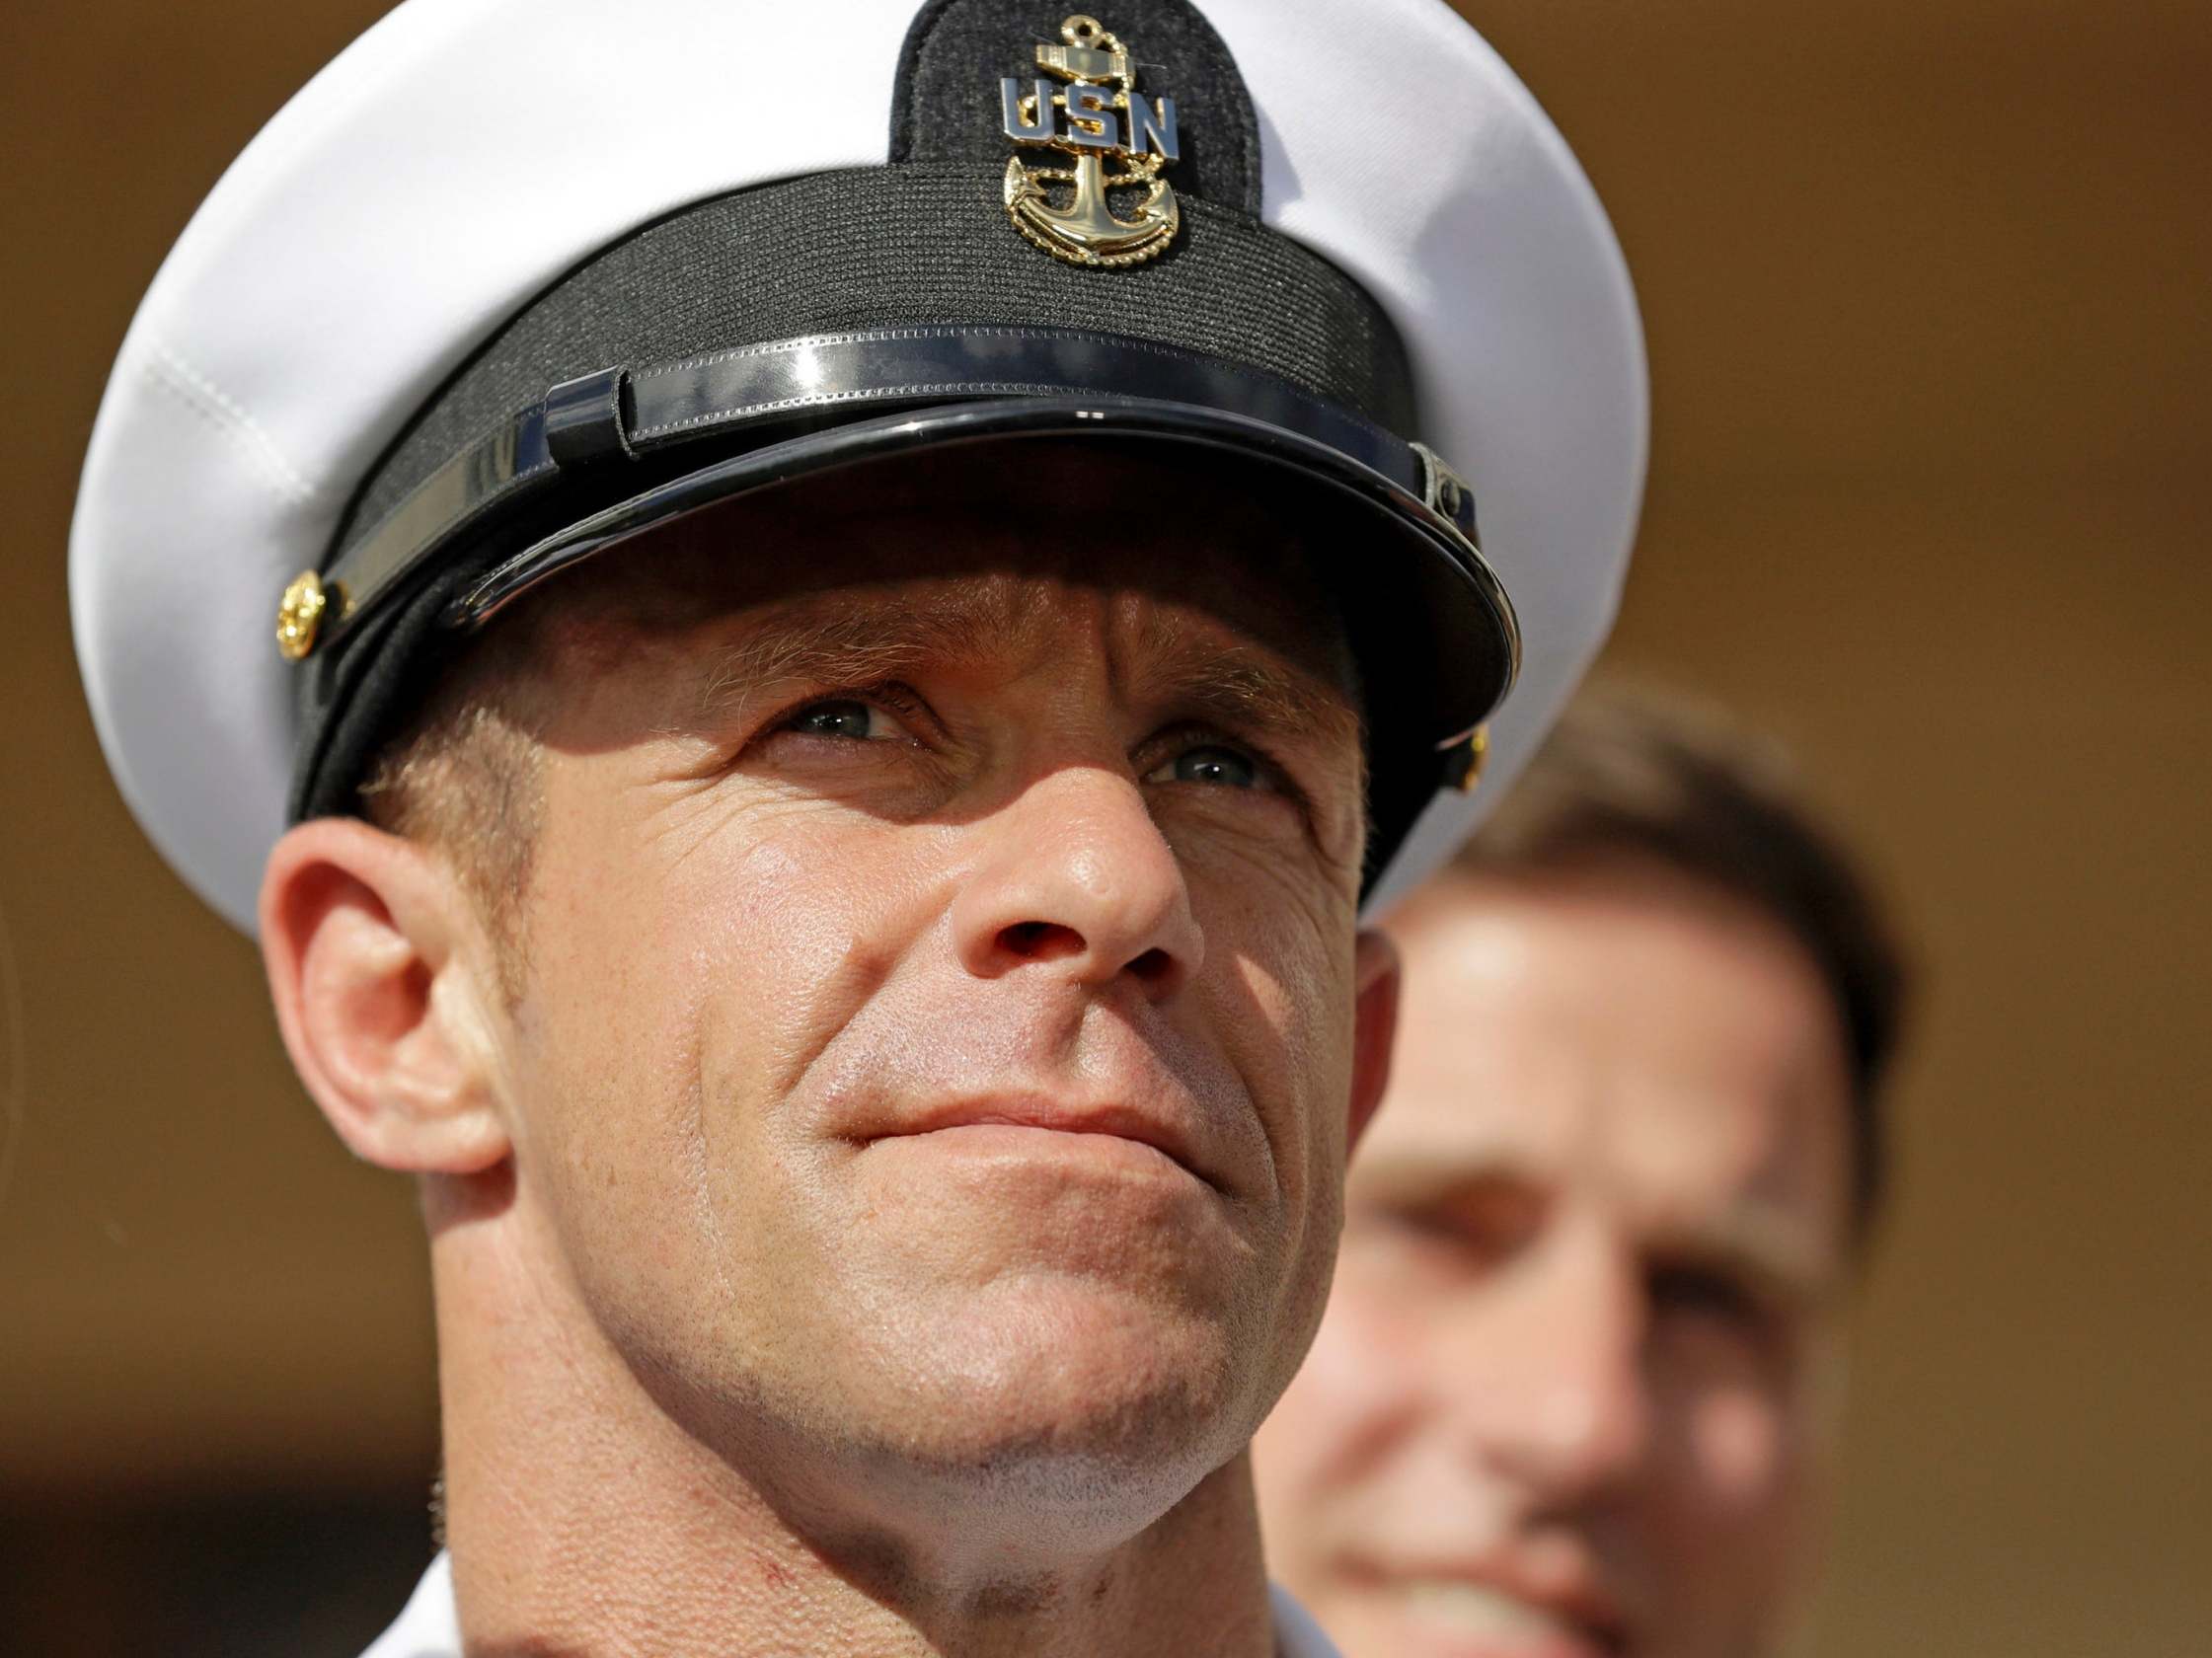 Navy seal Edward Gallagher was demoted after posing with the corpse of an ISIS militant